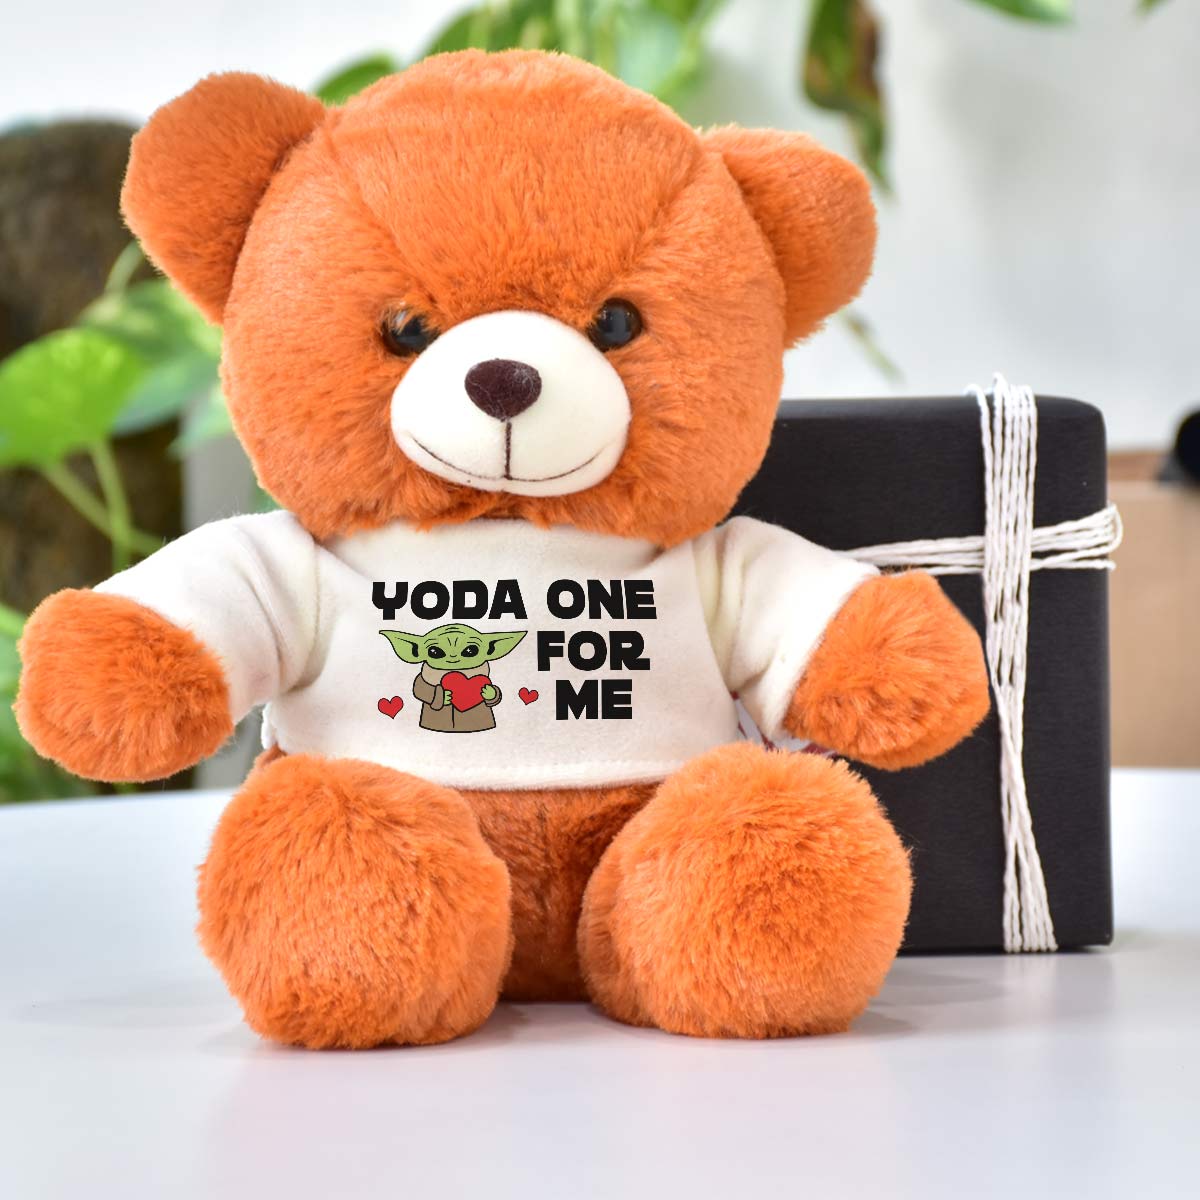 Yoda the one for me T-Shirt Teddy-1